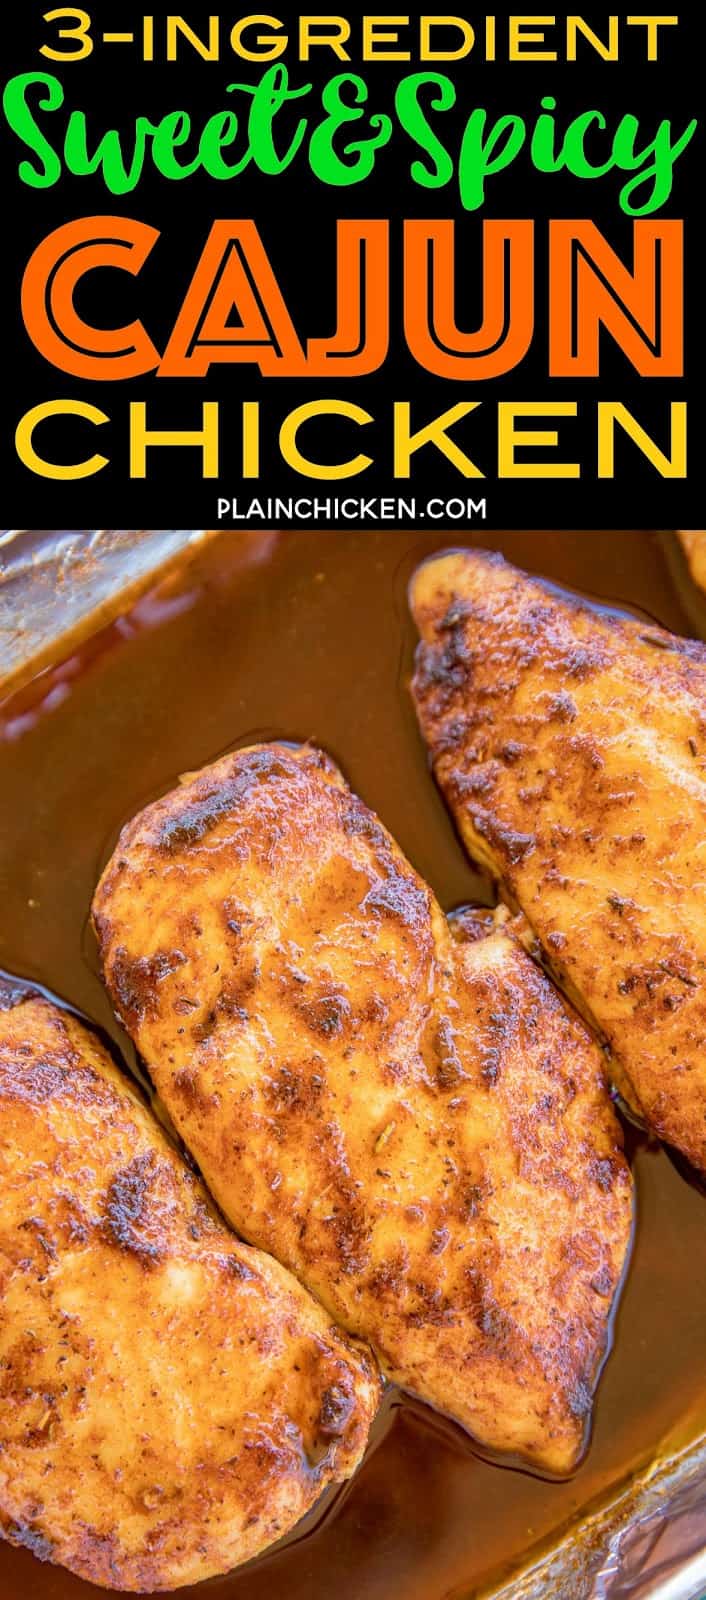 3-Ingredients Sweet and Spicy Cajun Chicken - seriously THE BEST baked chicken EVER! Only 3 ingredients and ready in under 30 minutes!! Chicken, brown sugar, cajun seasoning. There are never any leftovers. We make these at least once a month. SO good! Serve over rice or potatoes for an easy weeknight meal! #easydinnerrecipes #chickenrecipes #mardigras